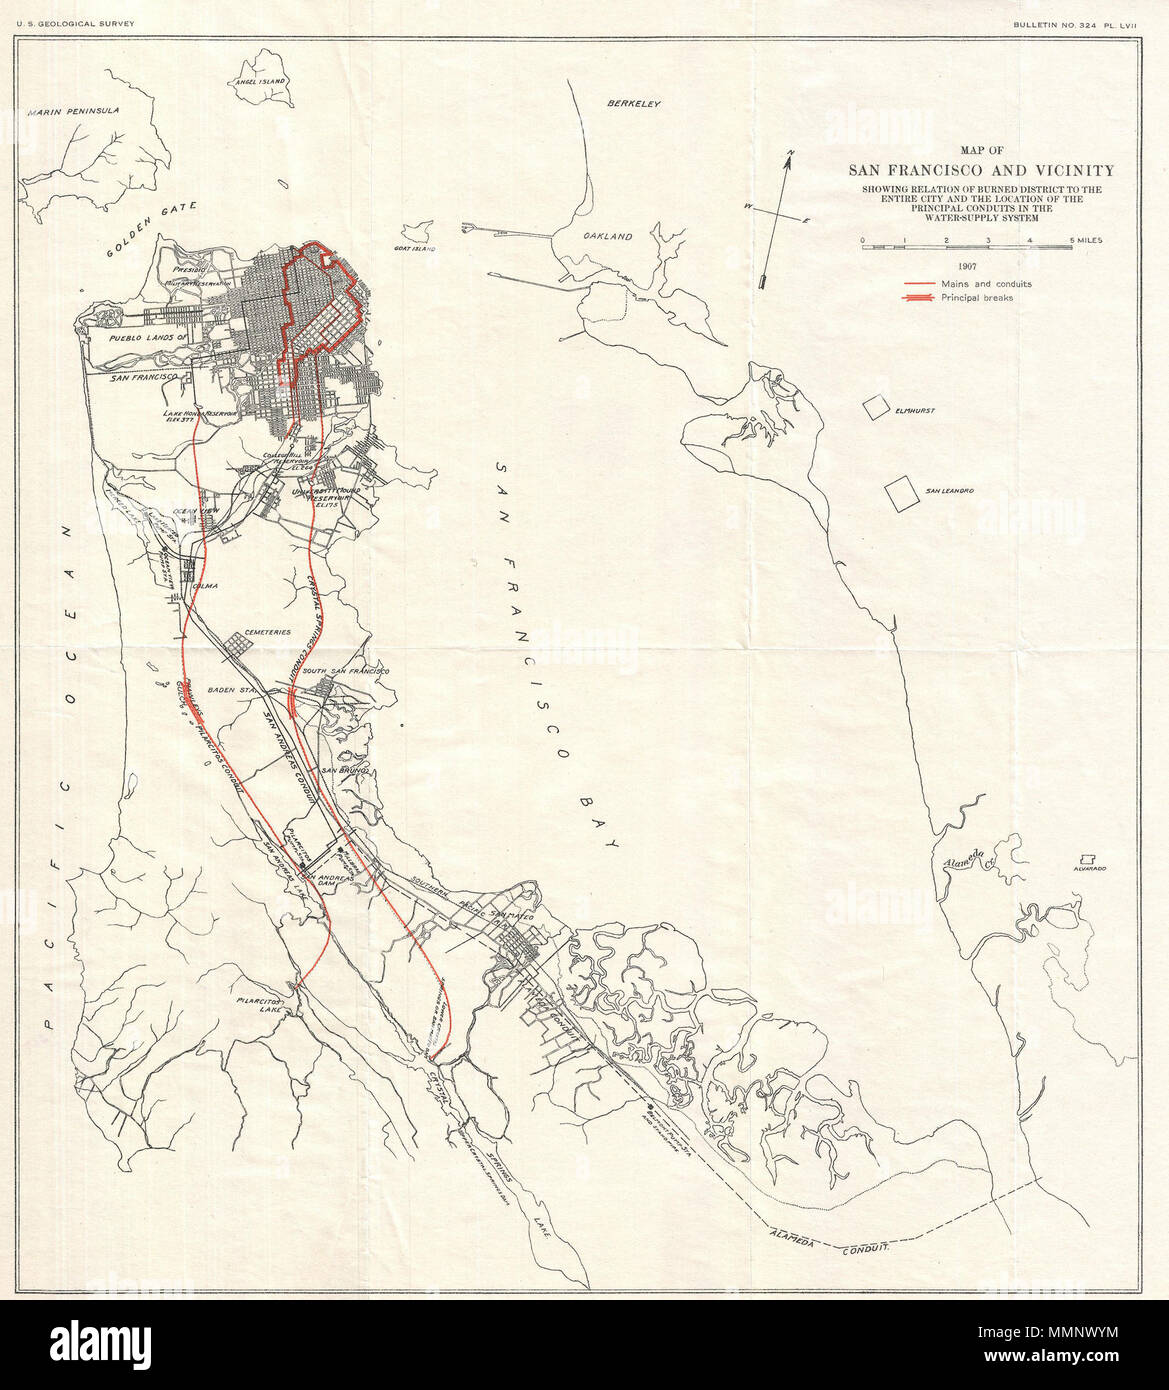 .  English: An unusual map of San Francisco Peninsula and part of San Francisco Bay dating to 1907. This map was published by the U.S. Geological Survey following the terrible San Francisco Earthquake and Fire of 1806. This natural disaster, comparable to the devastation wrought by Hurricane Katrina, is considered the largest is California History. This map highlights the developed parts of San Francisco most damaged by the fire in red ink. It also shows the water conduits that supply the city. Published in the U.S. Geological Survey's 1907 report on the San Francisco Earthquake and Fire.  Map Stock Photo